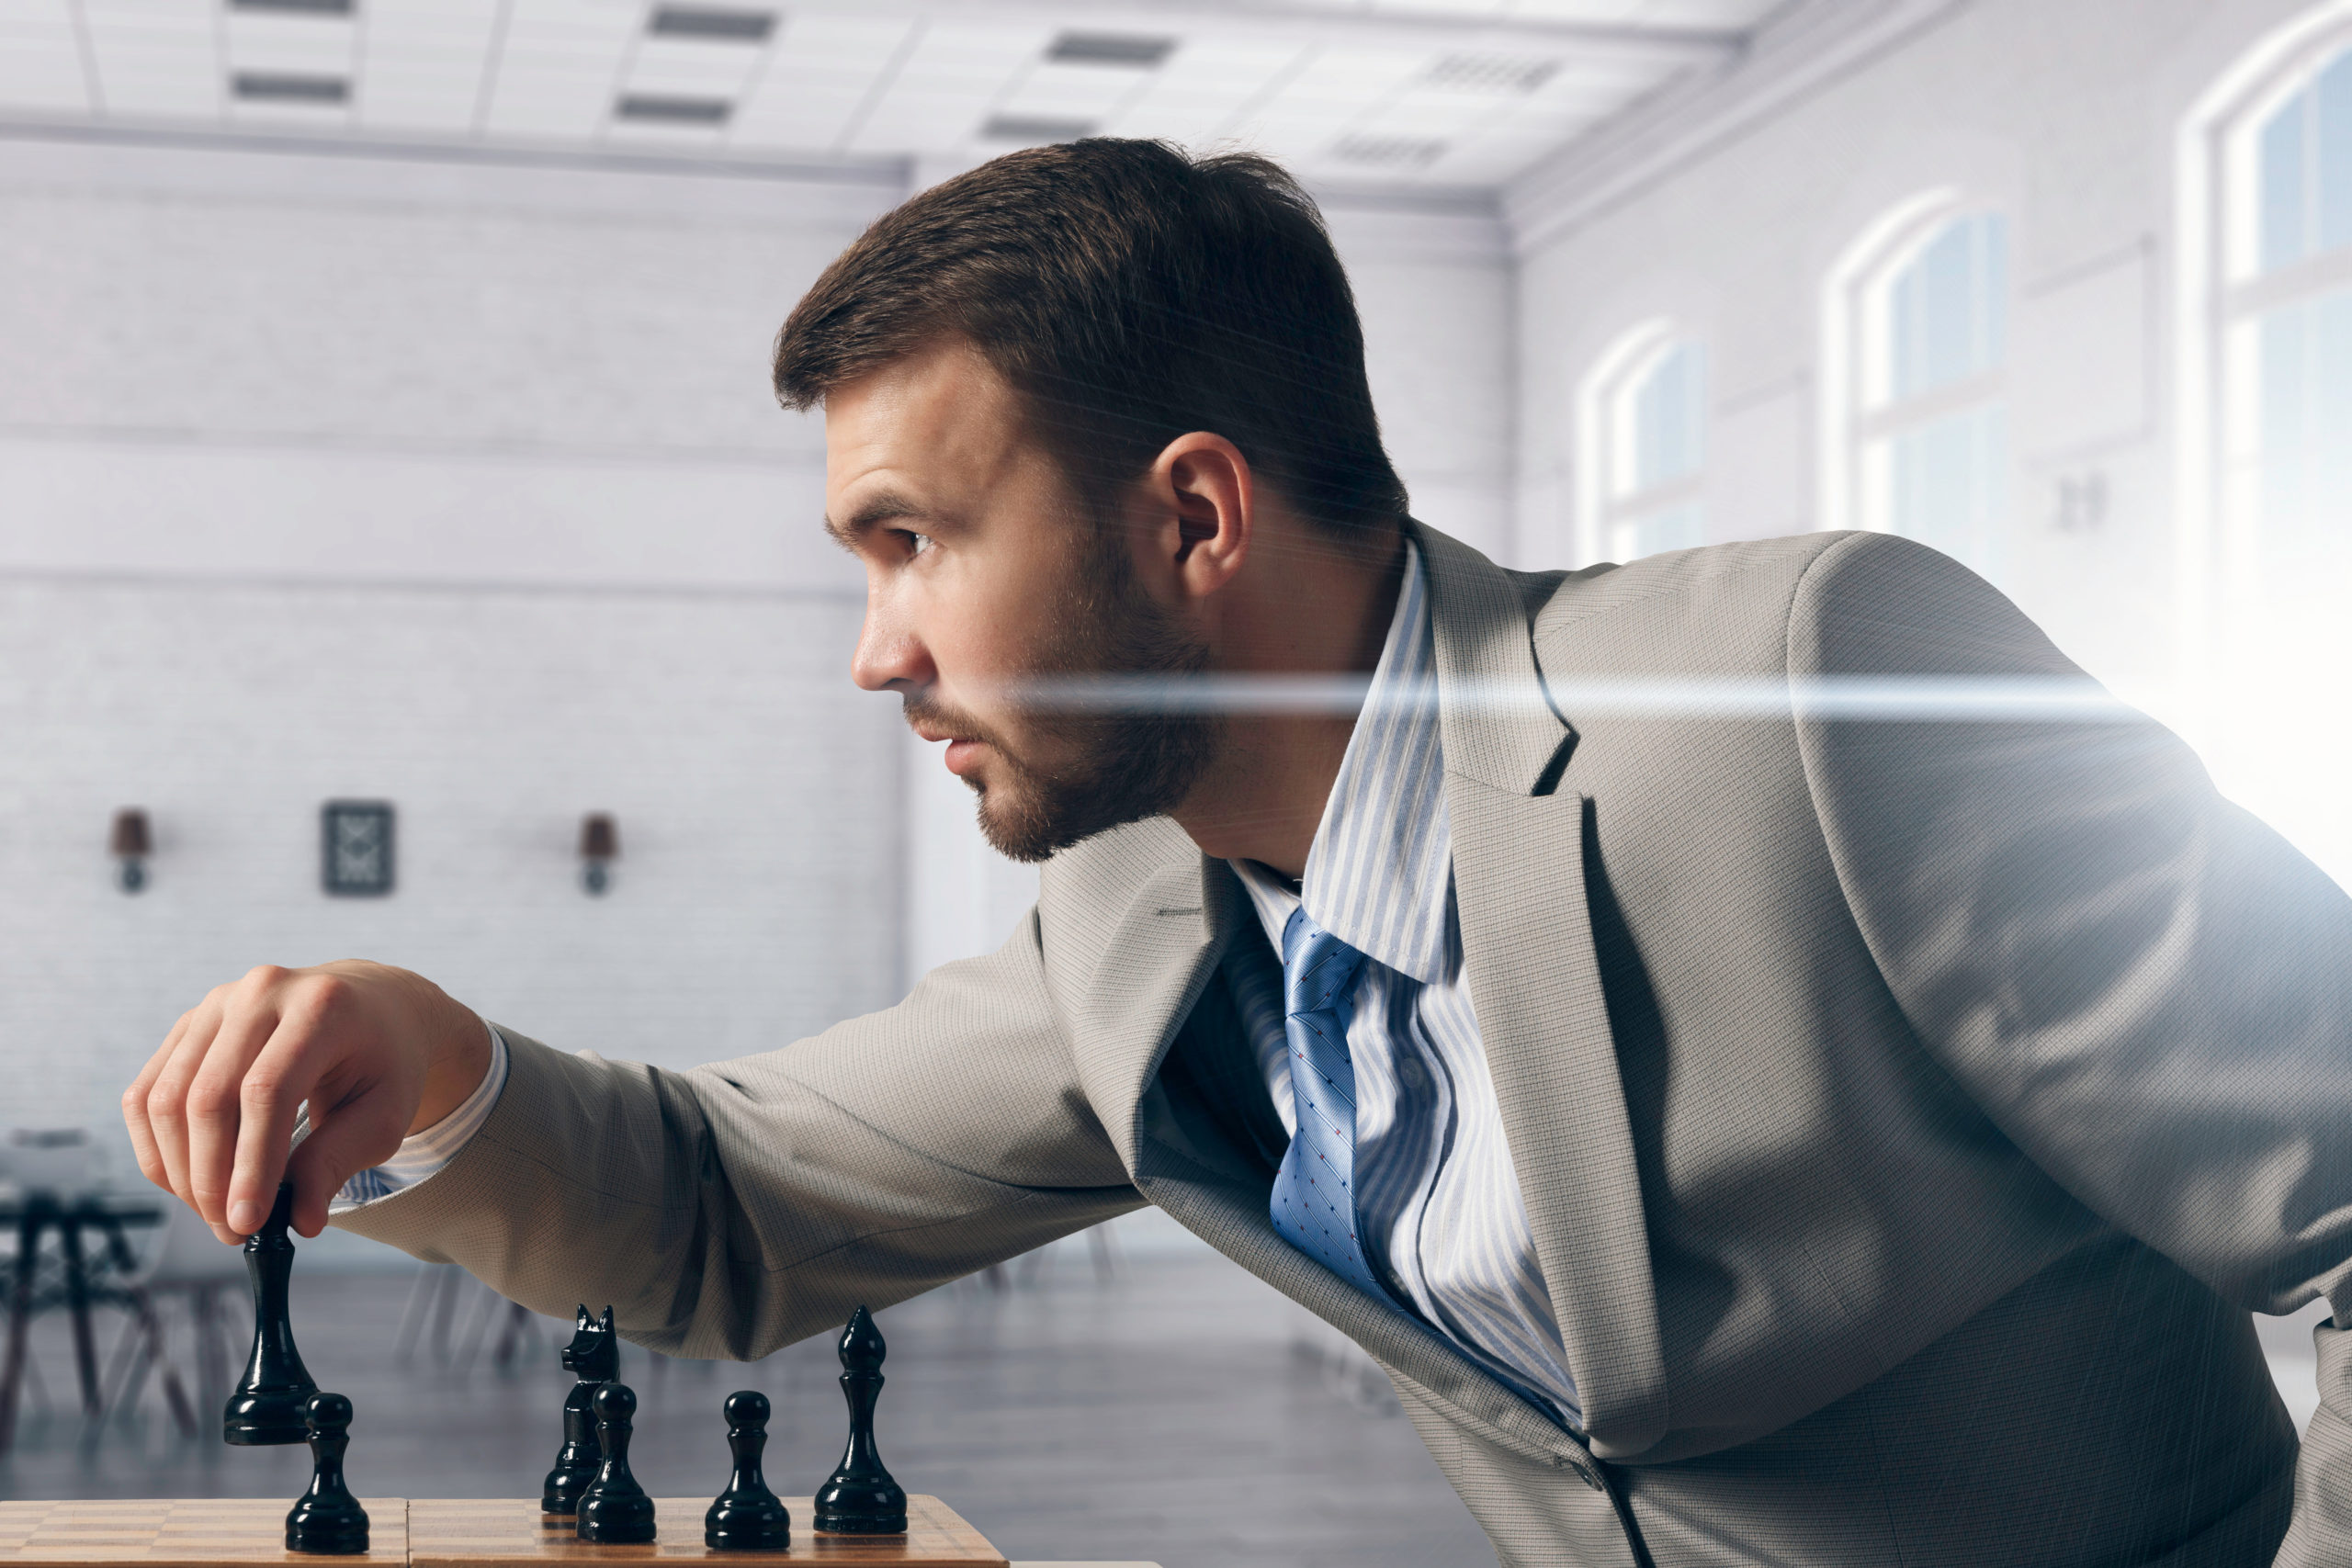 Essential Chess Strategy and Tactics